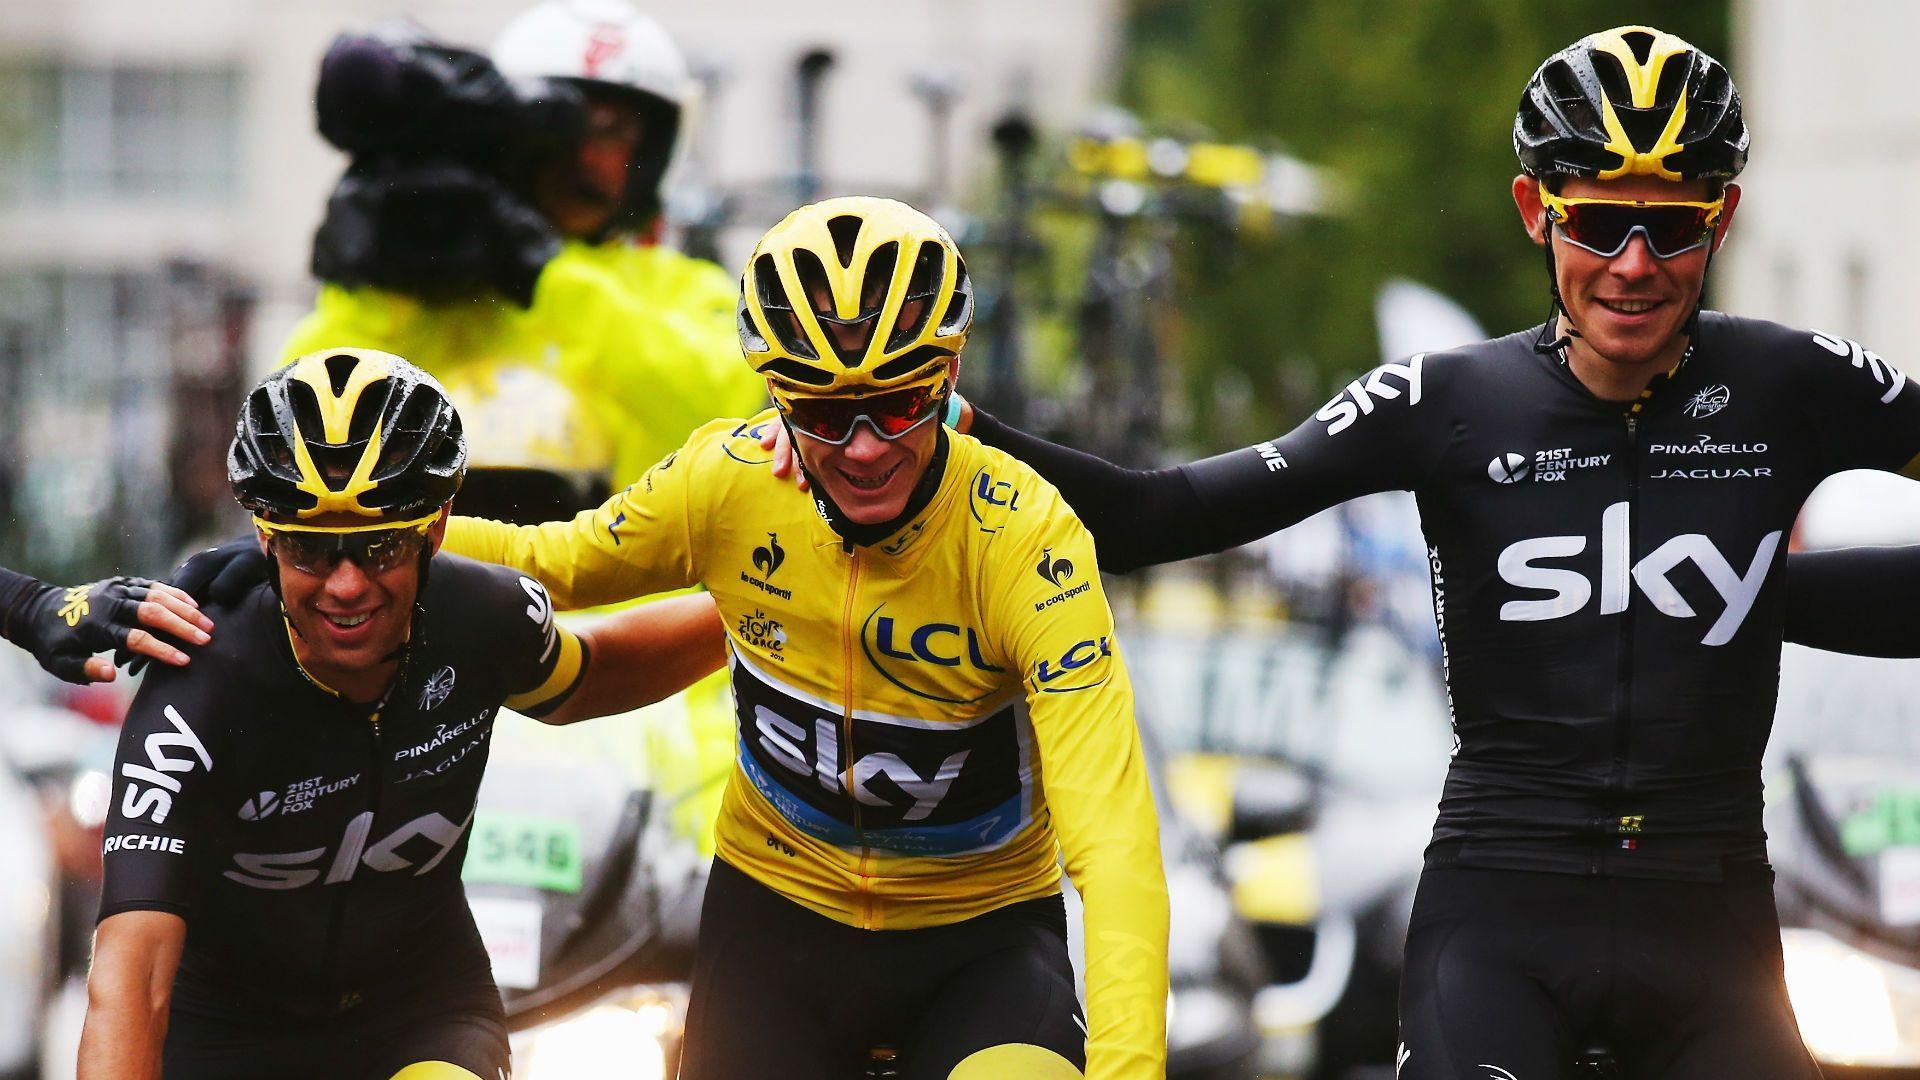 Chris Froome cruises to second Tour de France win in three years